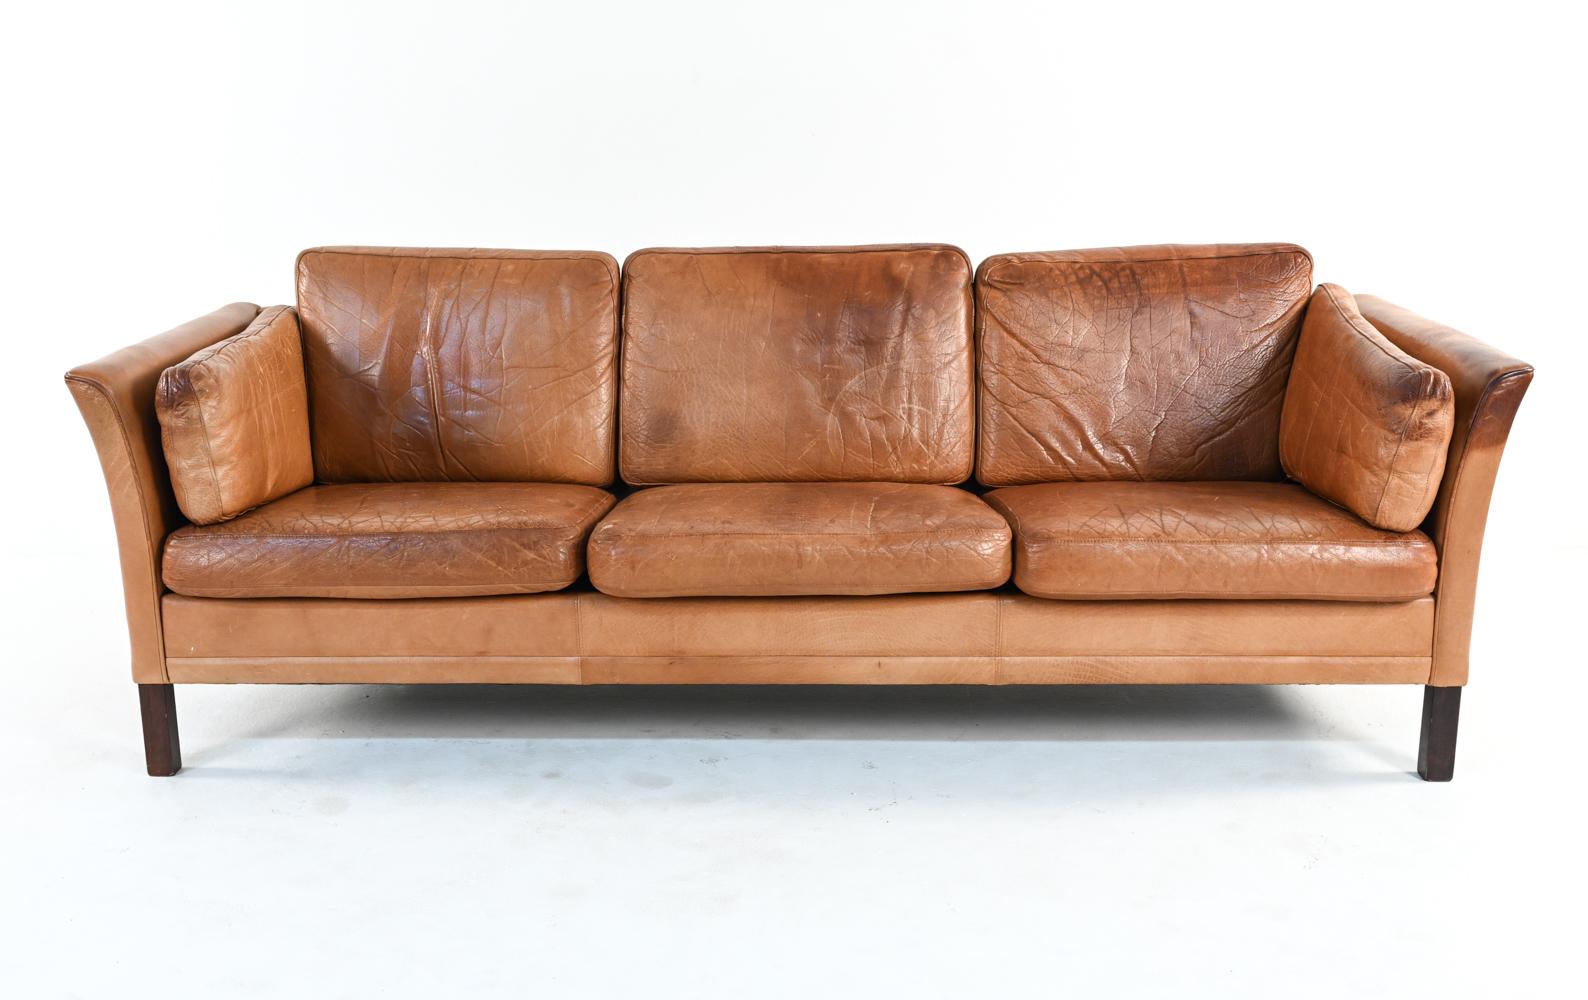 Celebrated for its ideal proportions, fine craftsmanship and ultimate comfort, the Mogens Hansen leather sofa has been a continuous design favorite for over four decades. This three-seater example features dark stained beechwood legs and handsomely